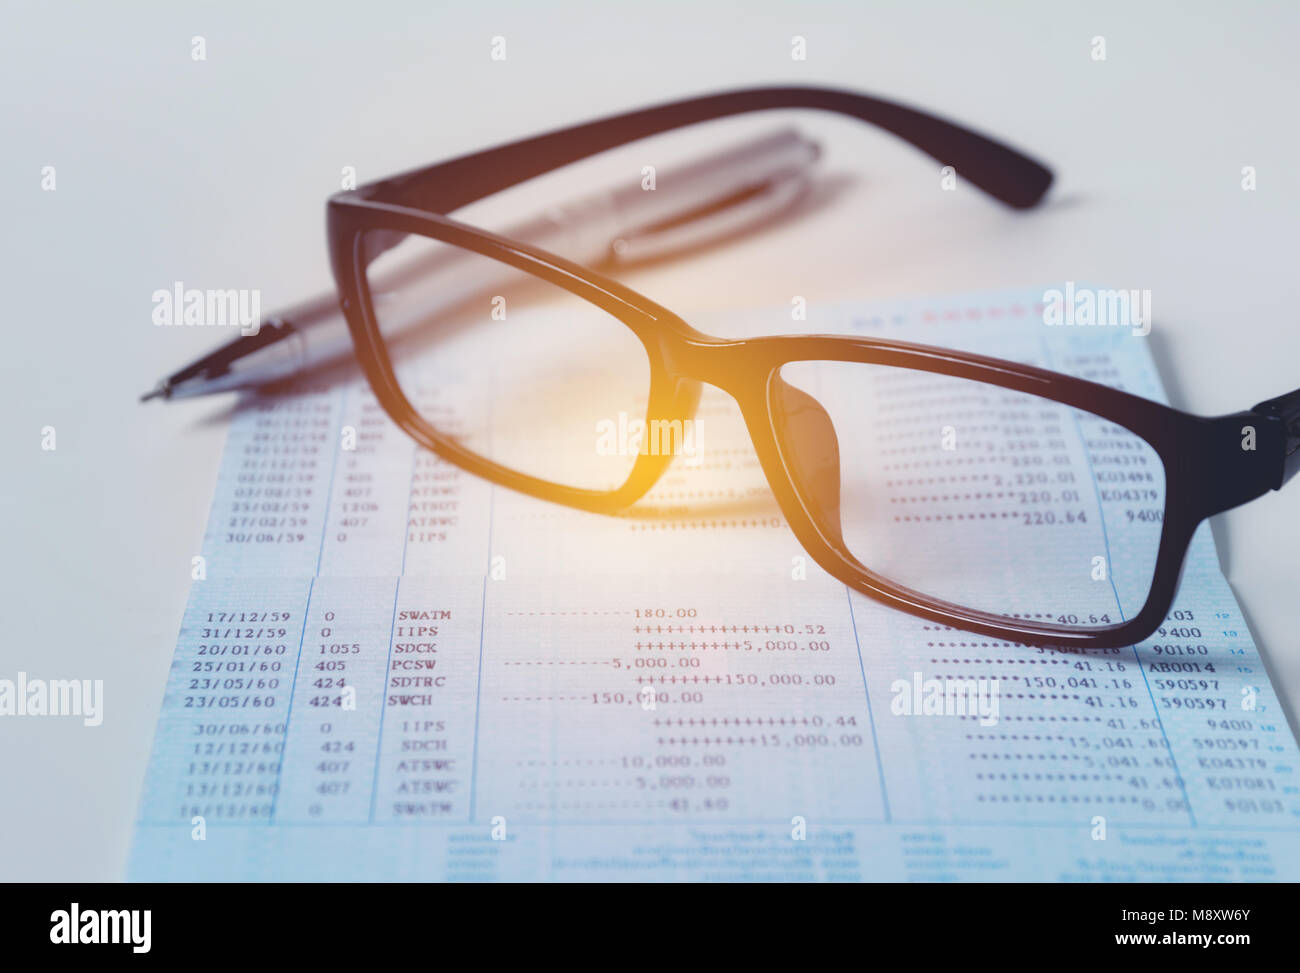 Glasses with bank account passbook for savings financial and accounting concept. Stock Photo